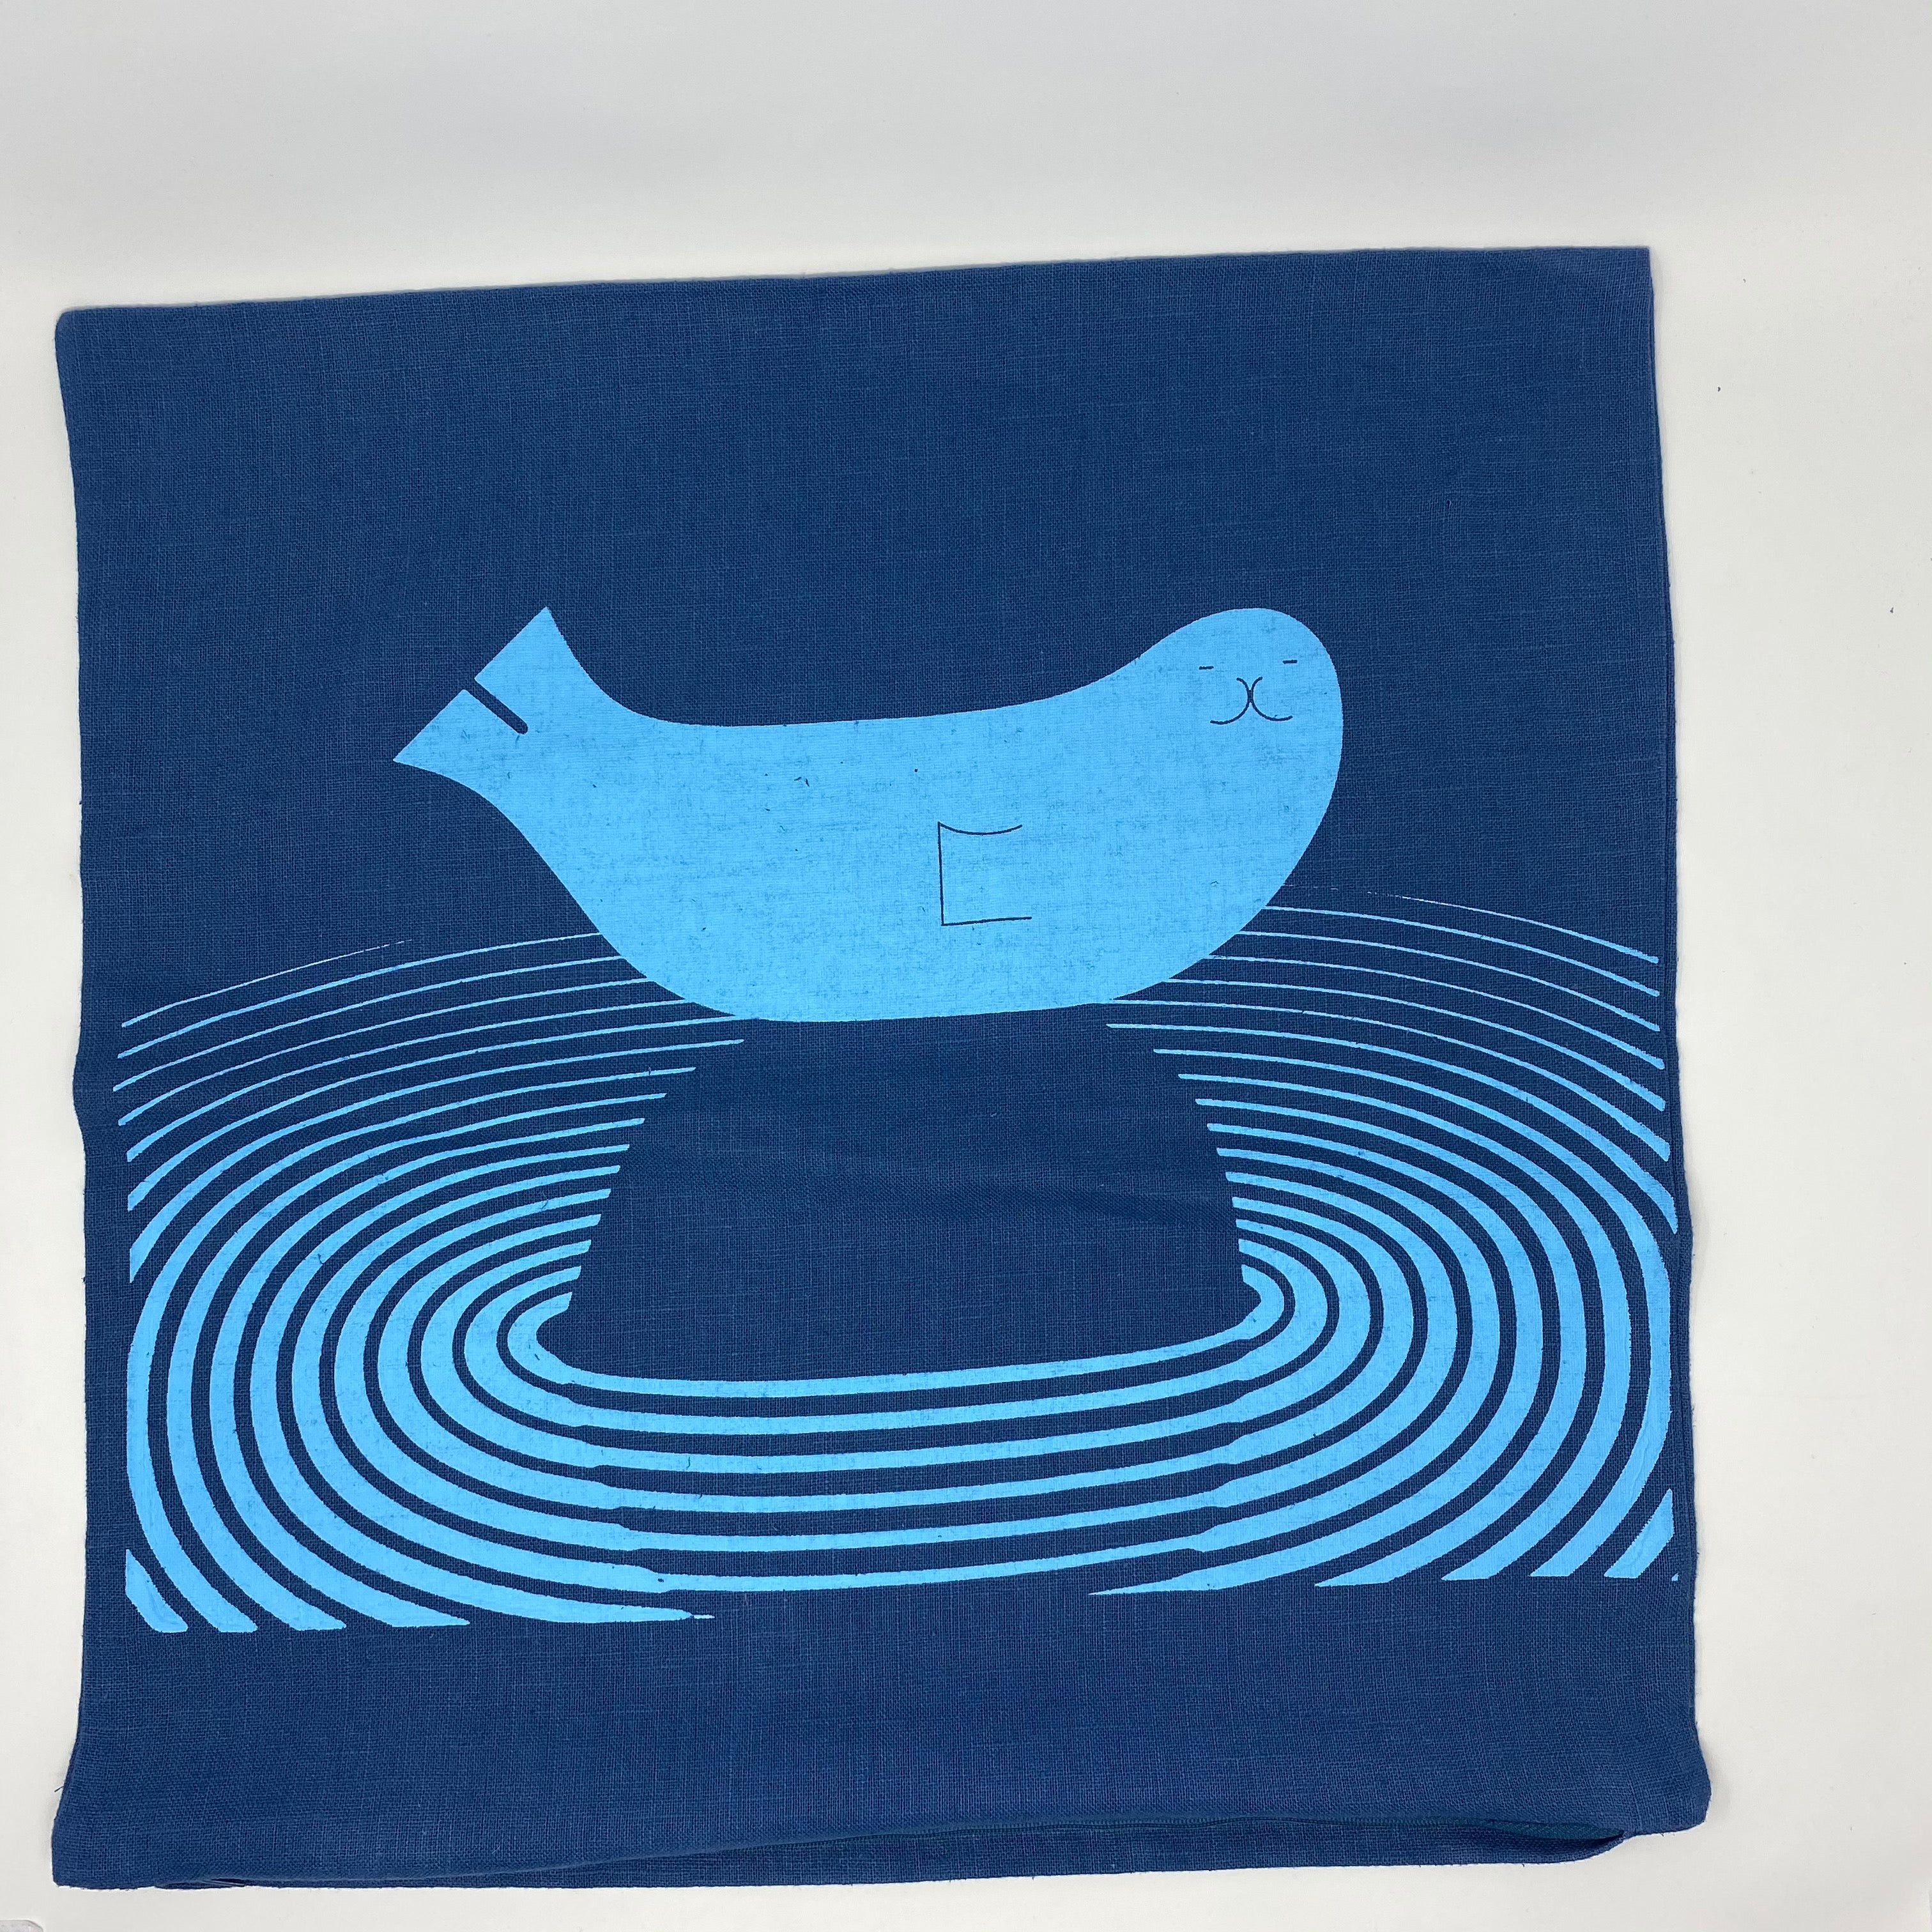 blue 20x20 pillow covers